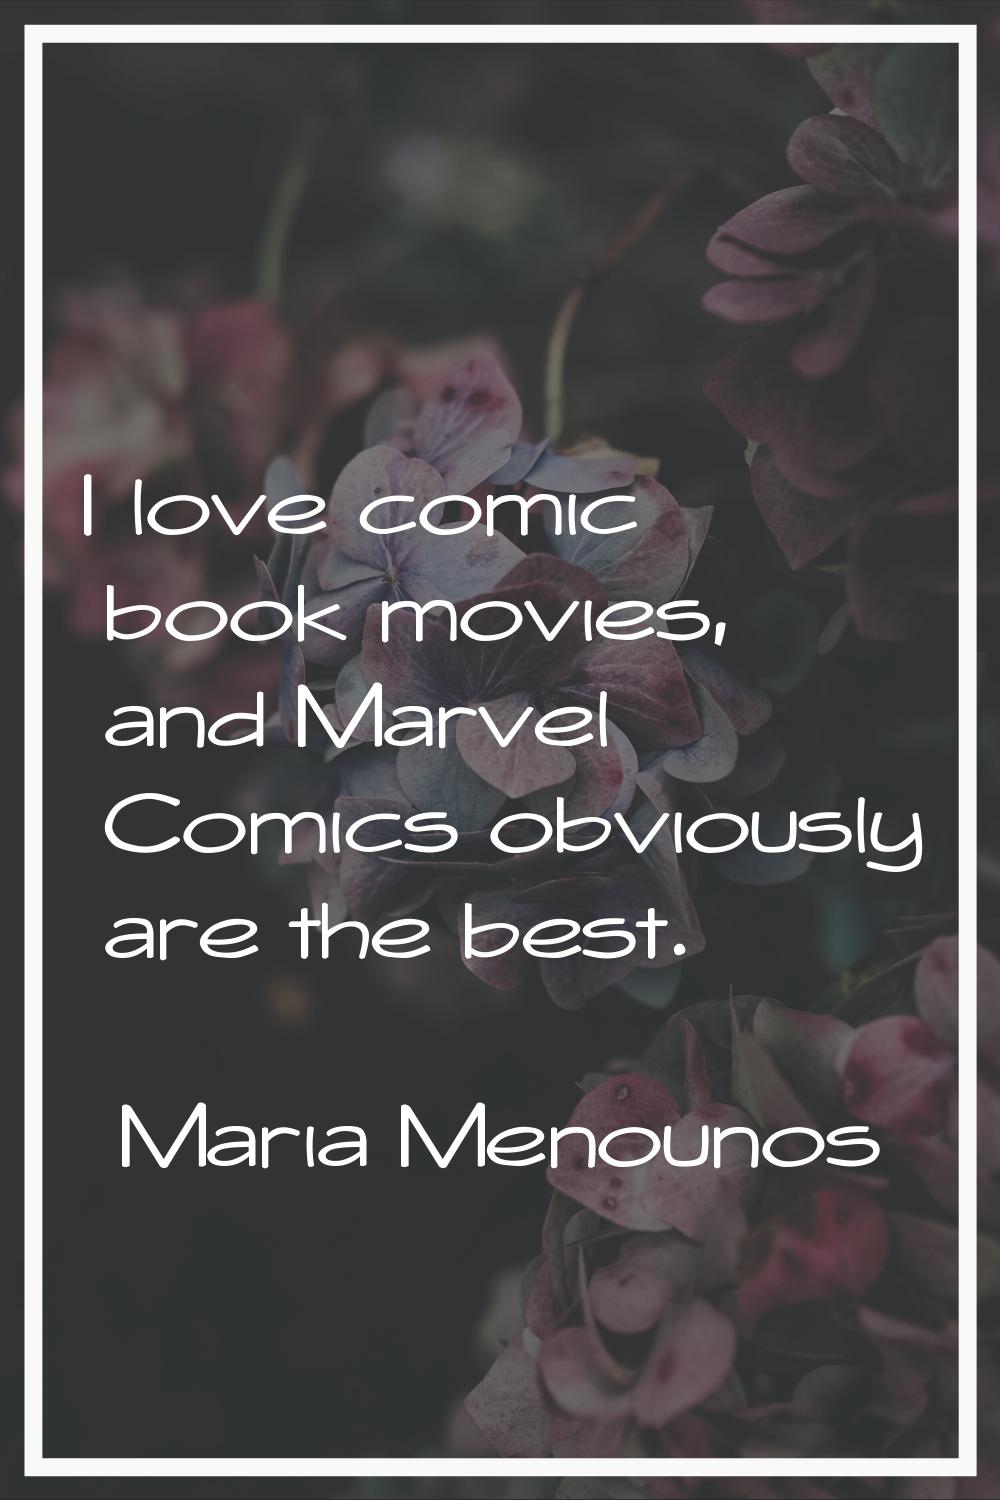 I love comic book movies, and Marvel Comics obviously are the best.